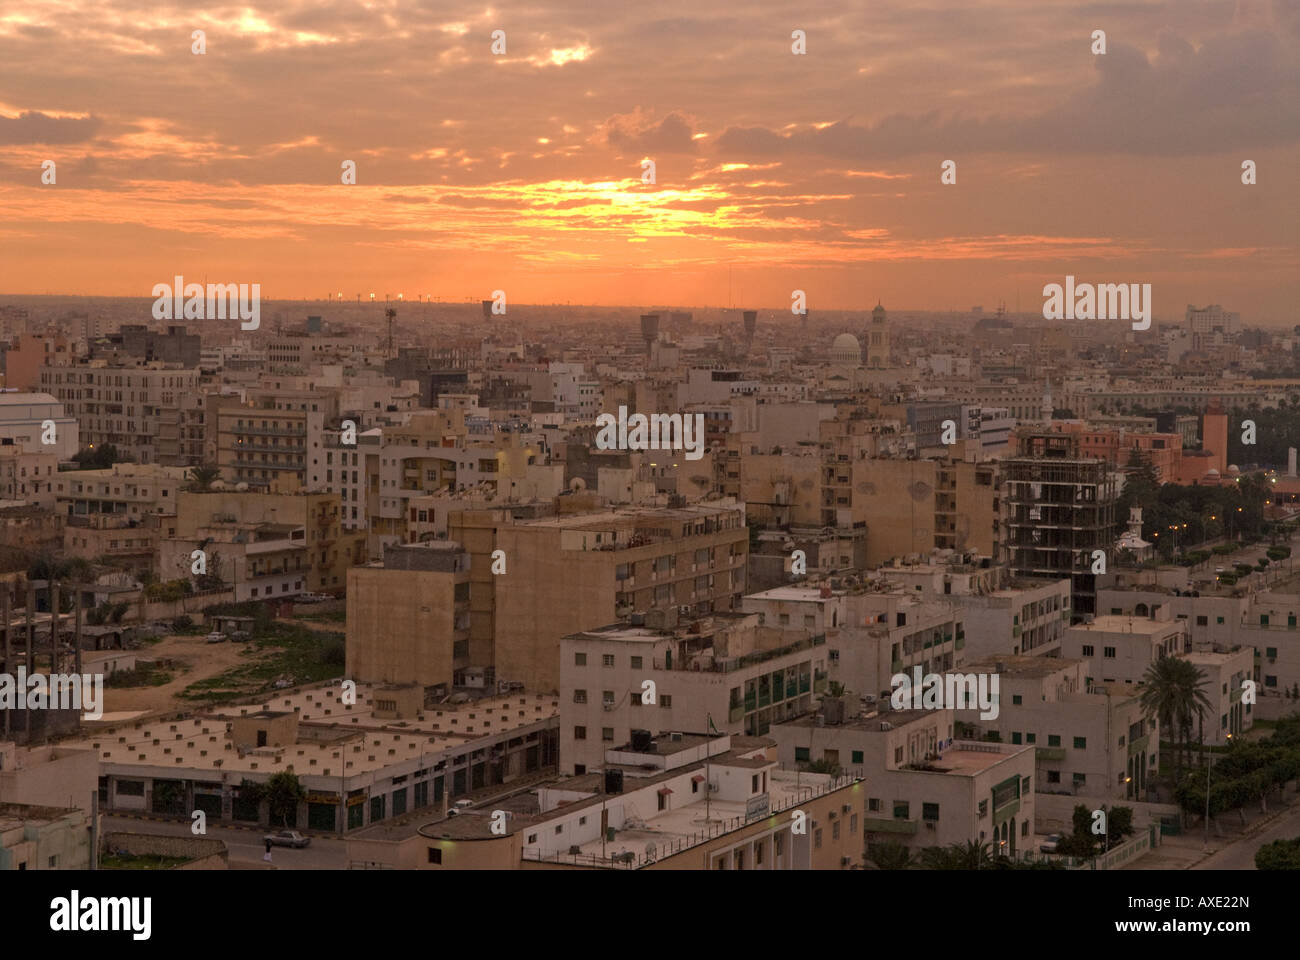 General view over the rooftops of the city of Tripoli, Libya. Stock Photo